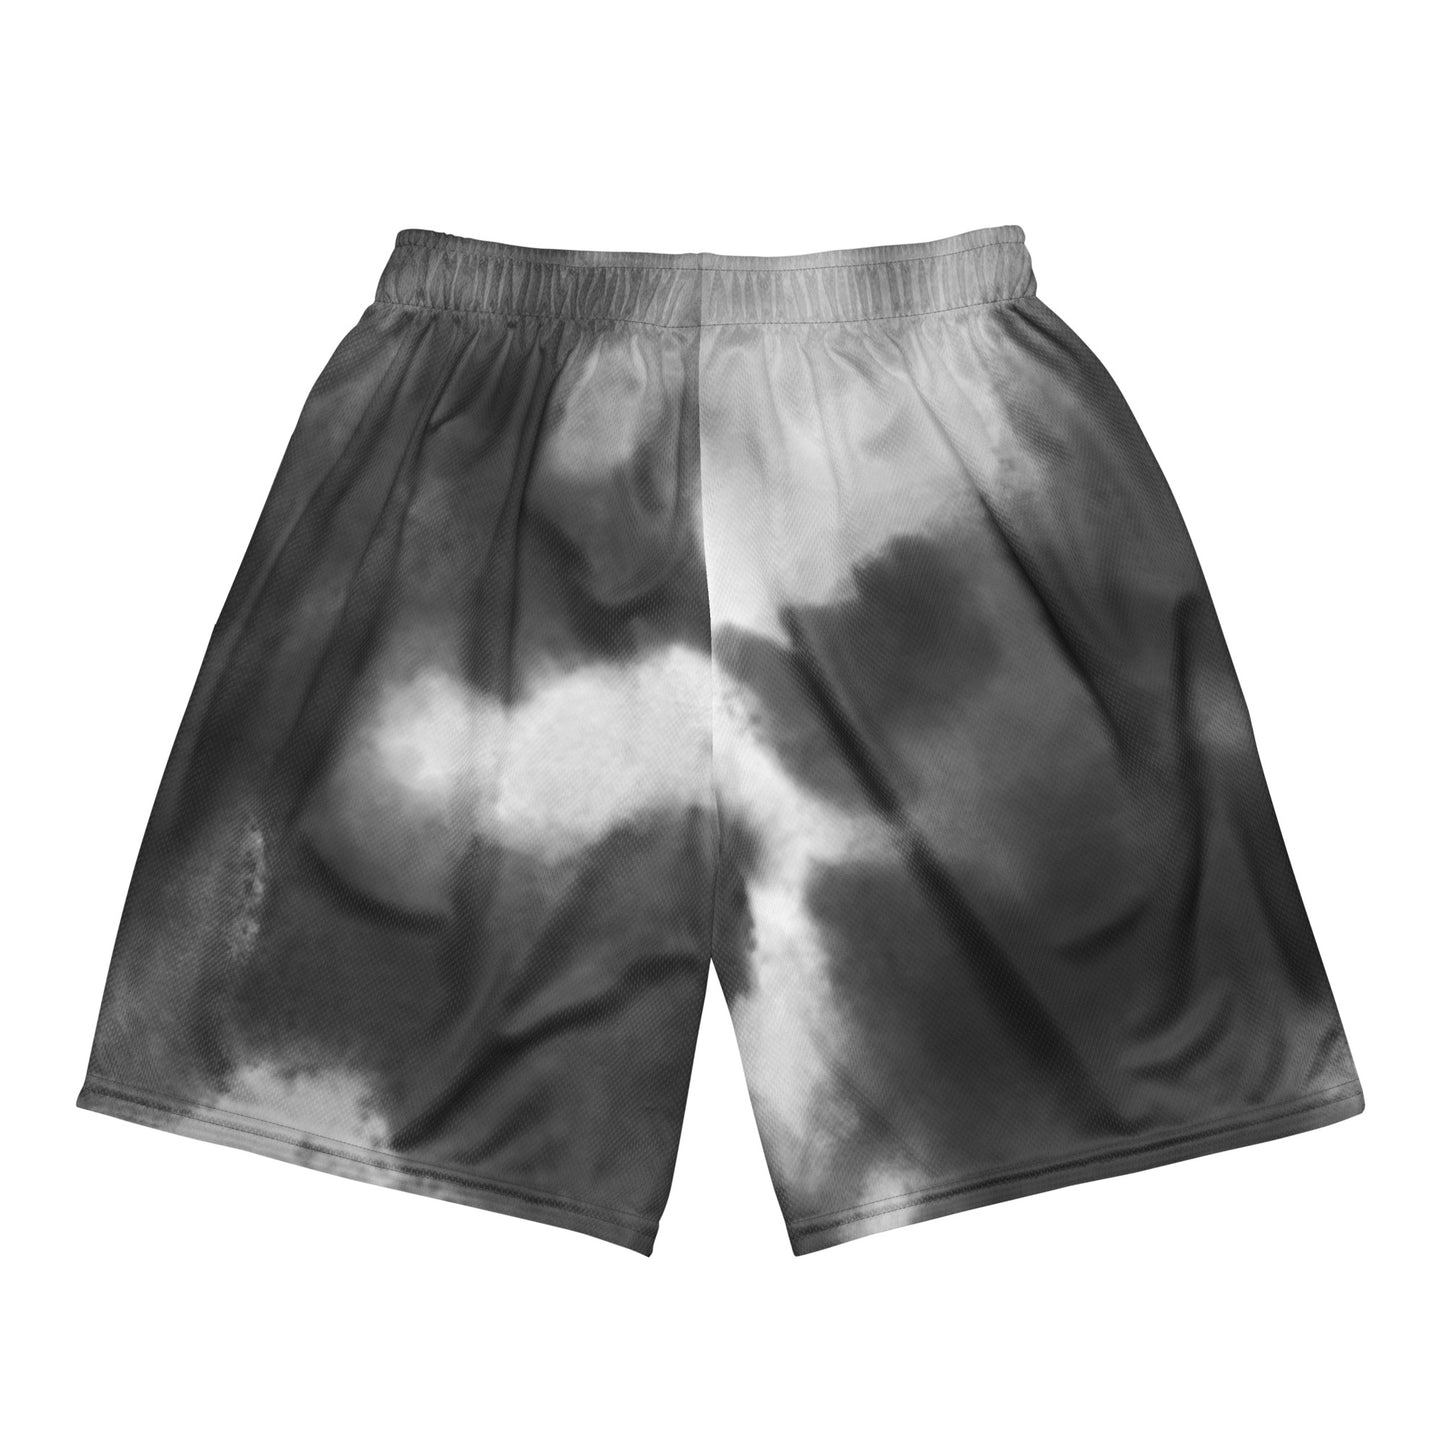 Protect Trans Youth Unisex Shorts - Rose Gold Co. Shop